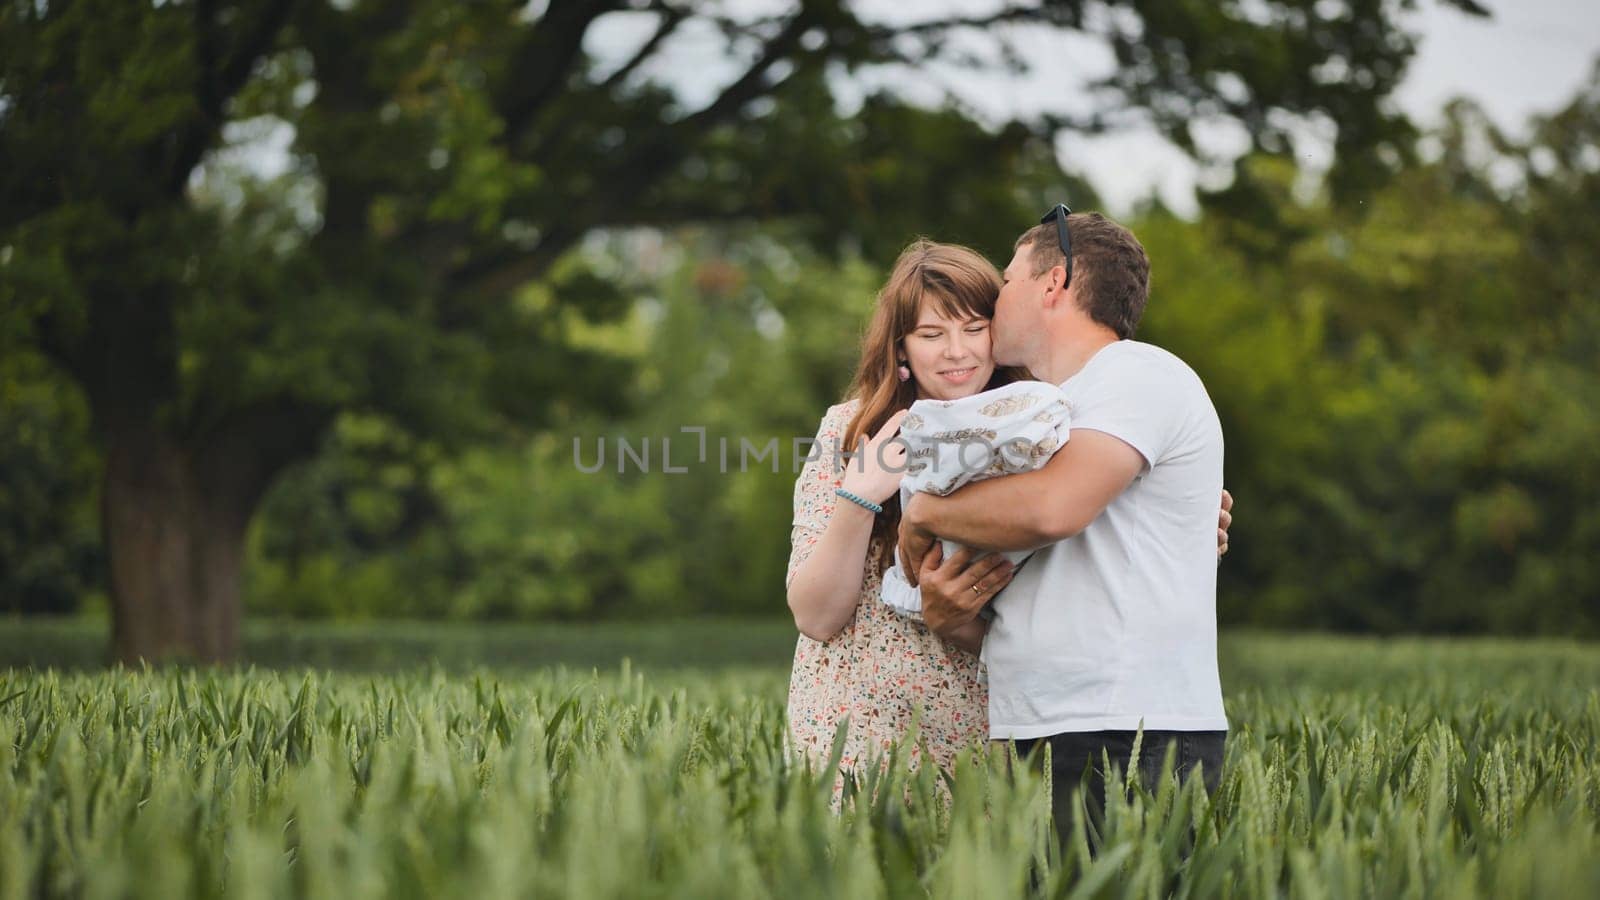 A young couple standing in a field kissing and holding their newborn baby in their arms